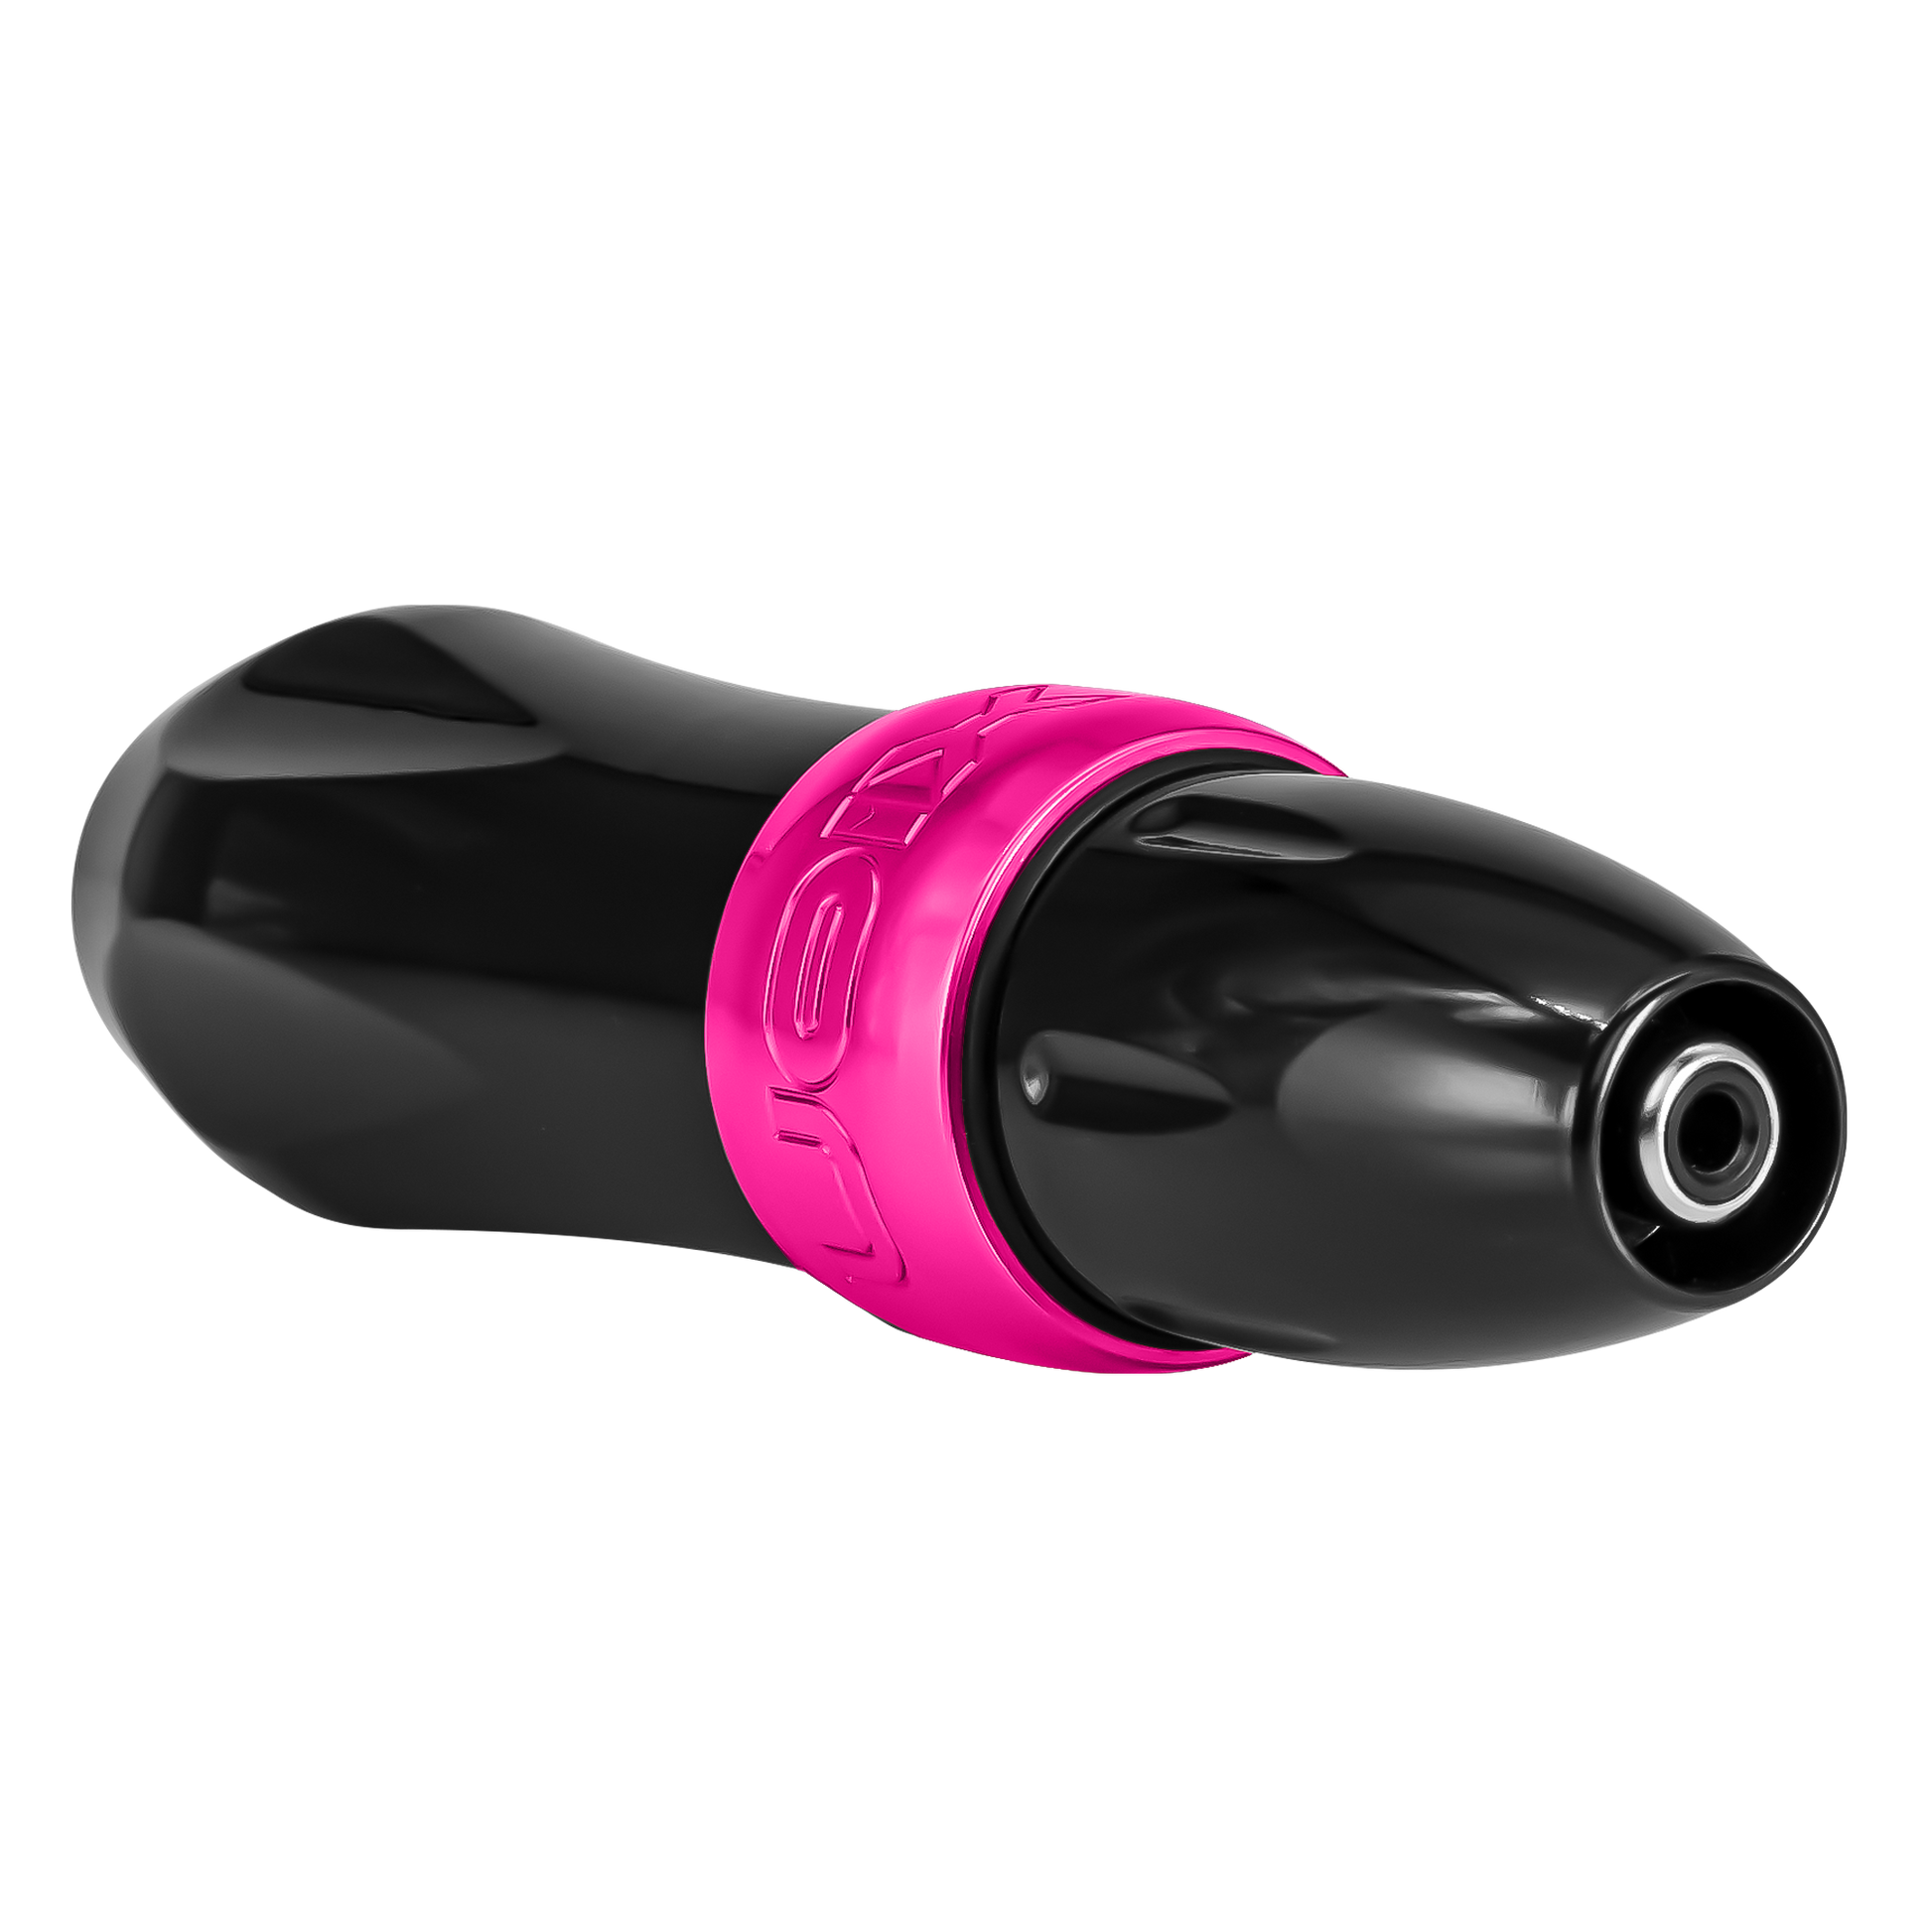 Spectra Xion tattoo machine in black with a bright pink band on the machine body, view of the plugSpektra Xion BubbleGum with LightningBolt